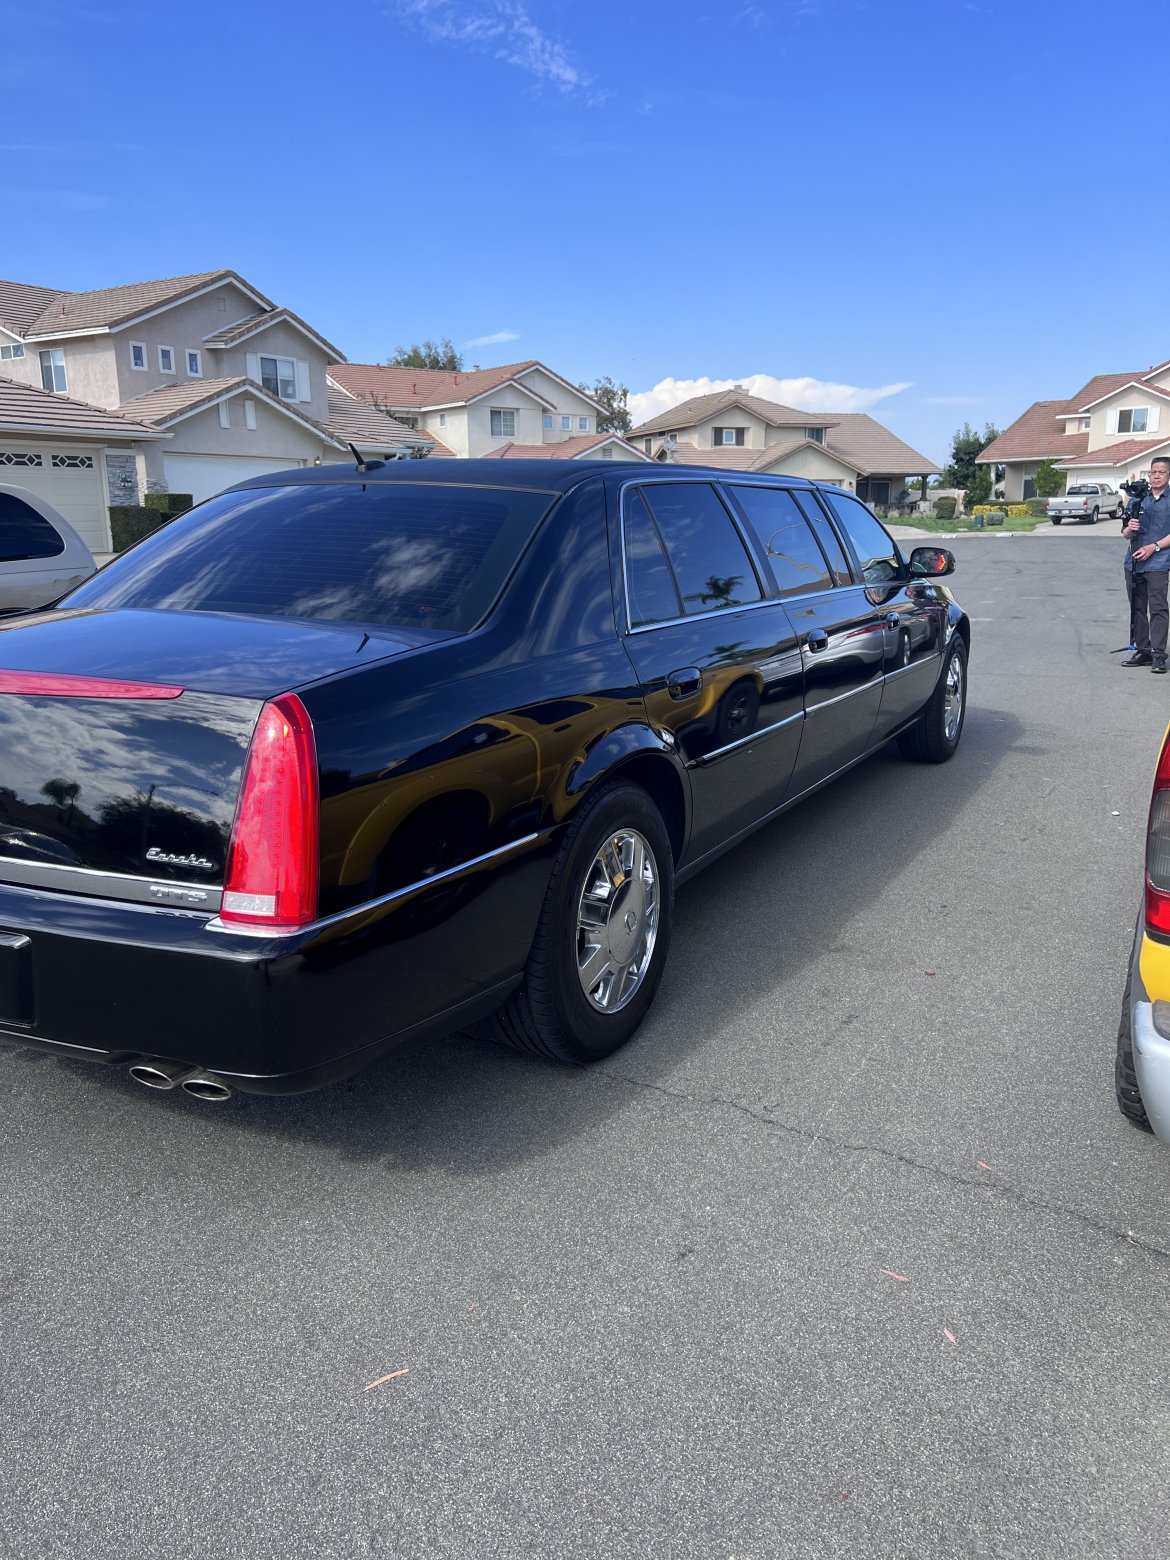 Limousine for sale: 2007 Cadillac DTS by General Motors